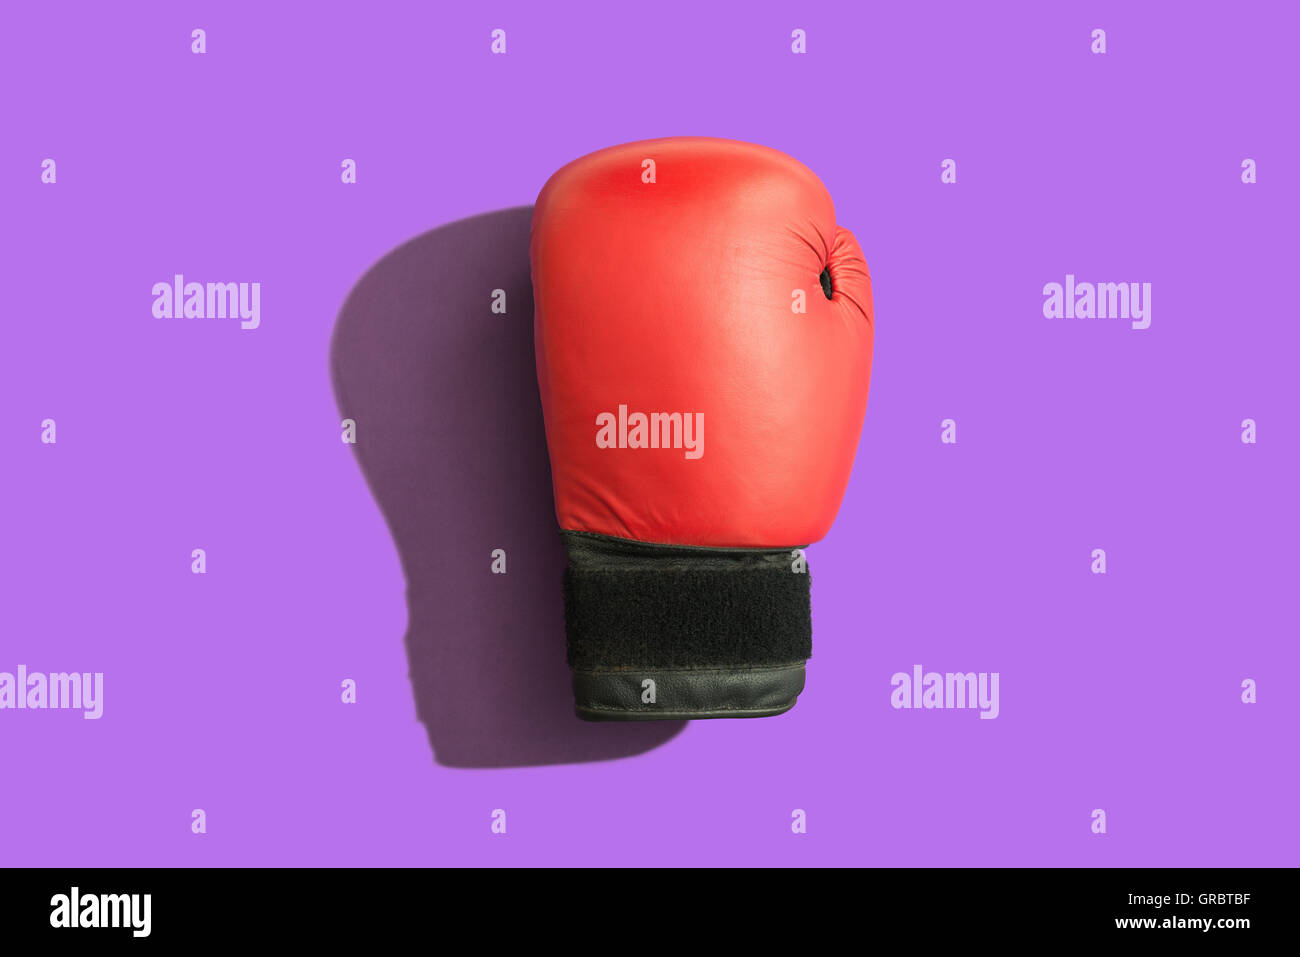 Lonsdale Boxing Glove, Hanging, Red, Copy Space, Sport, Dark